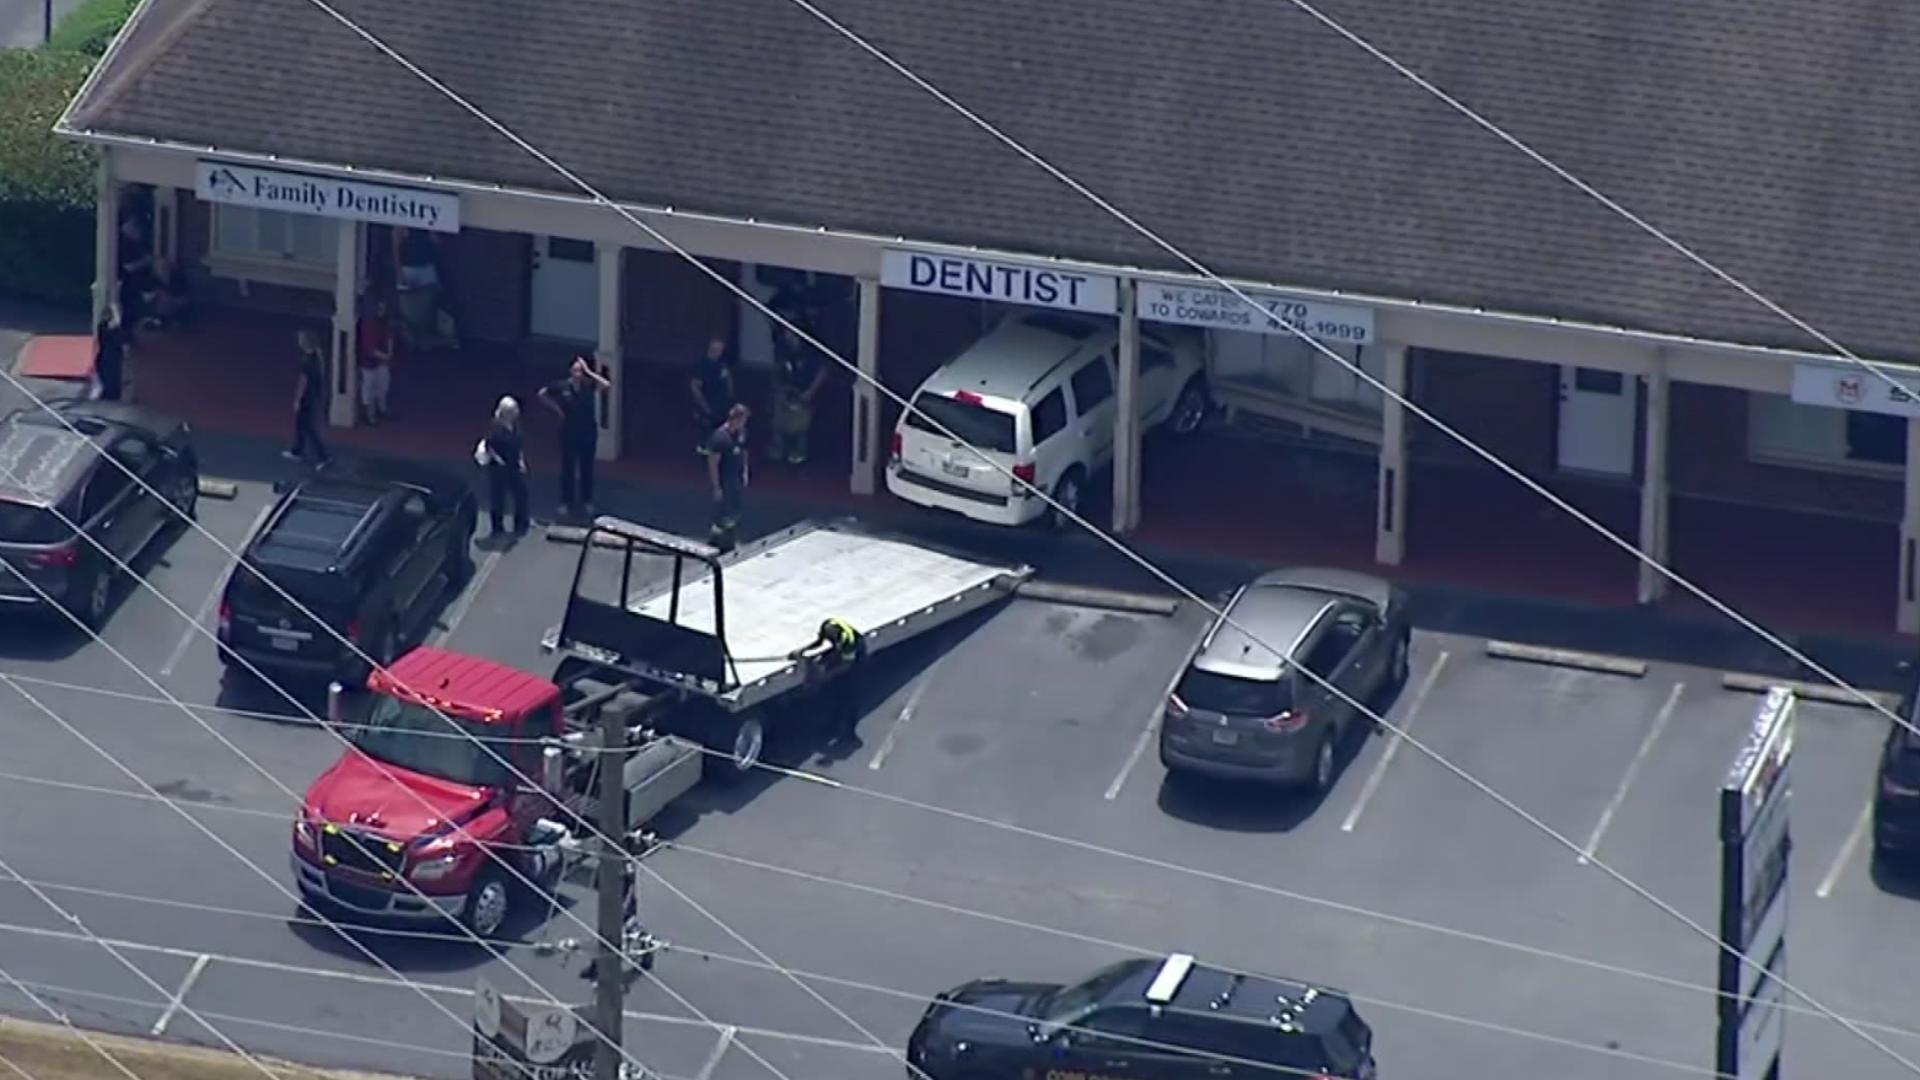 11Alive SkyTracker flew over the scene after a car crashed into a dentist's office along Villa Rica Way in Cobb County.